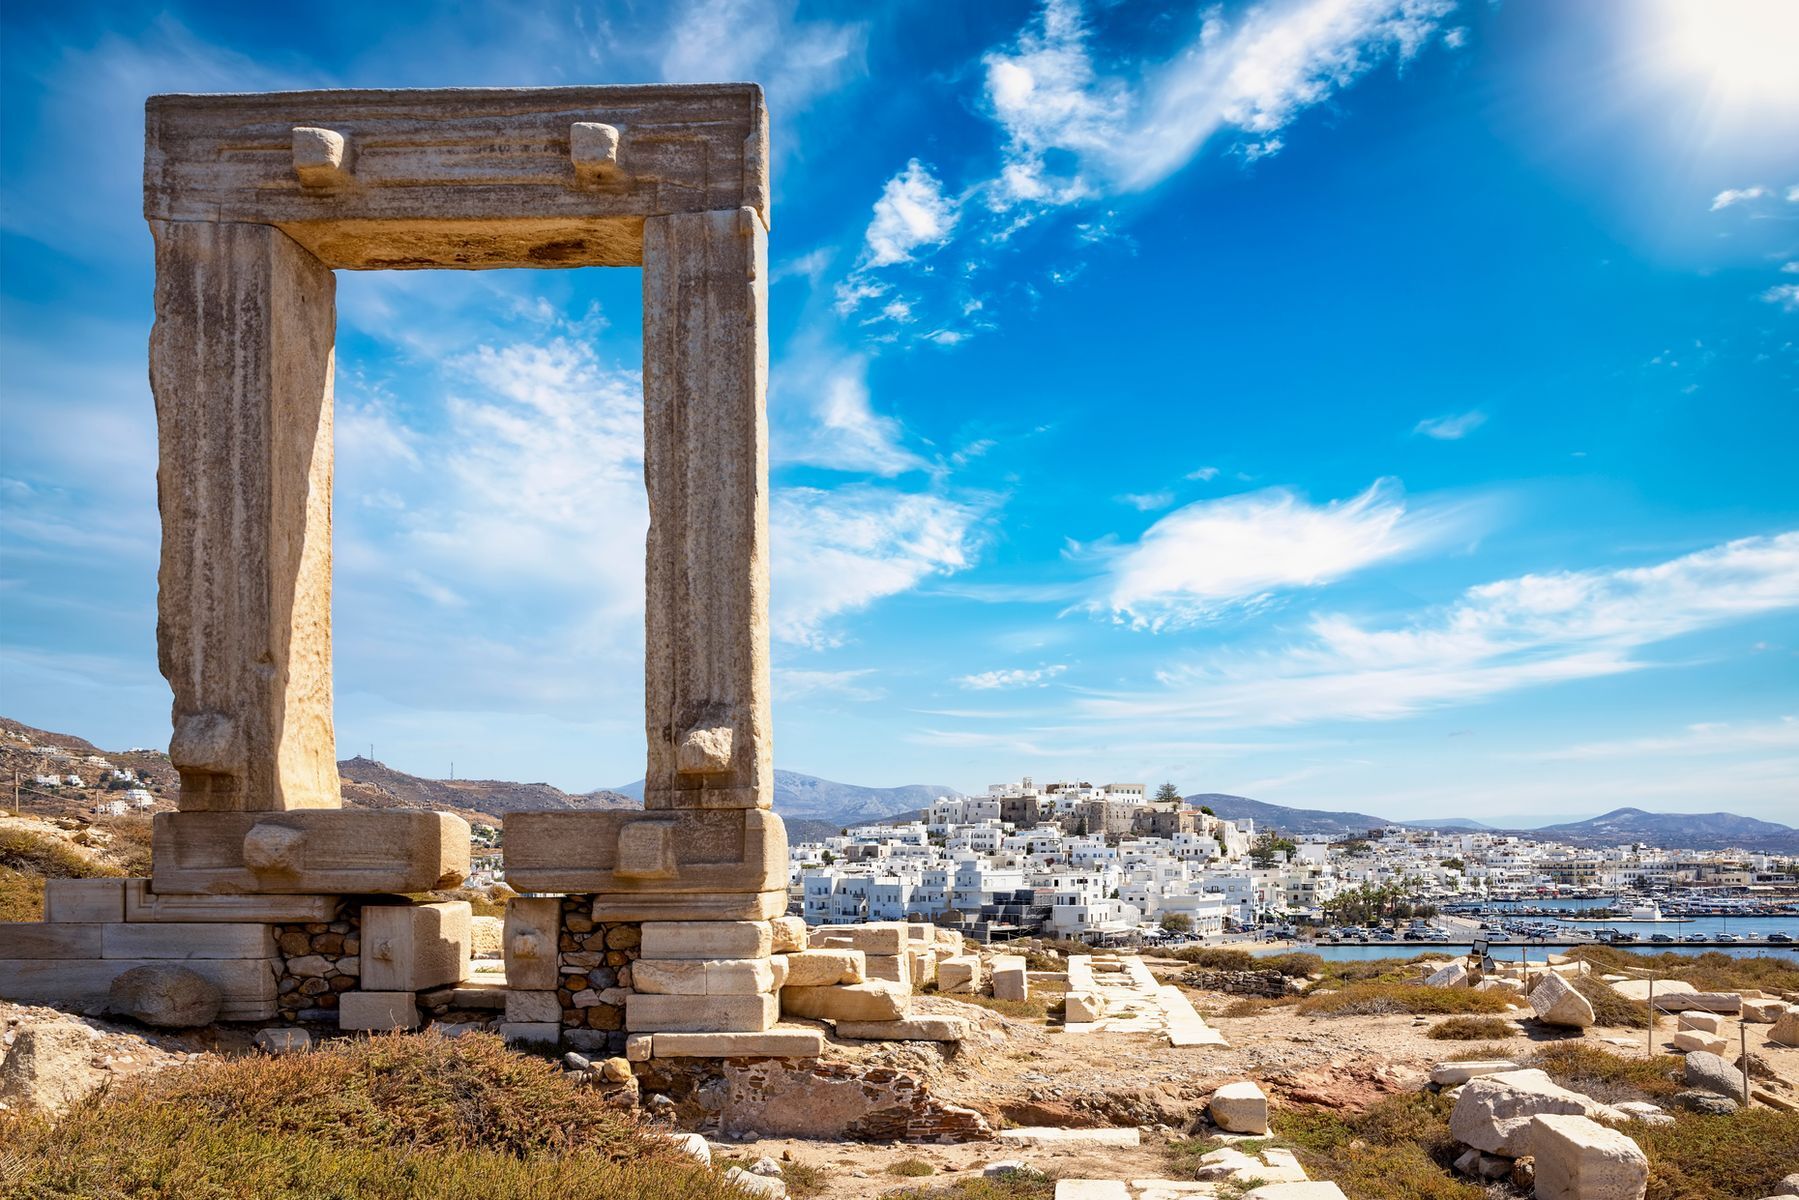 Paradise islands, historical relics, and countless other attractions make Greece a dream destination for many travellers. To help plan your next voyage into the heart of Greek culture, we’ve put together 20 of the most spectacular places to add to your itinerary.